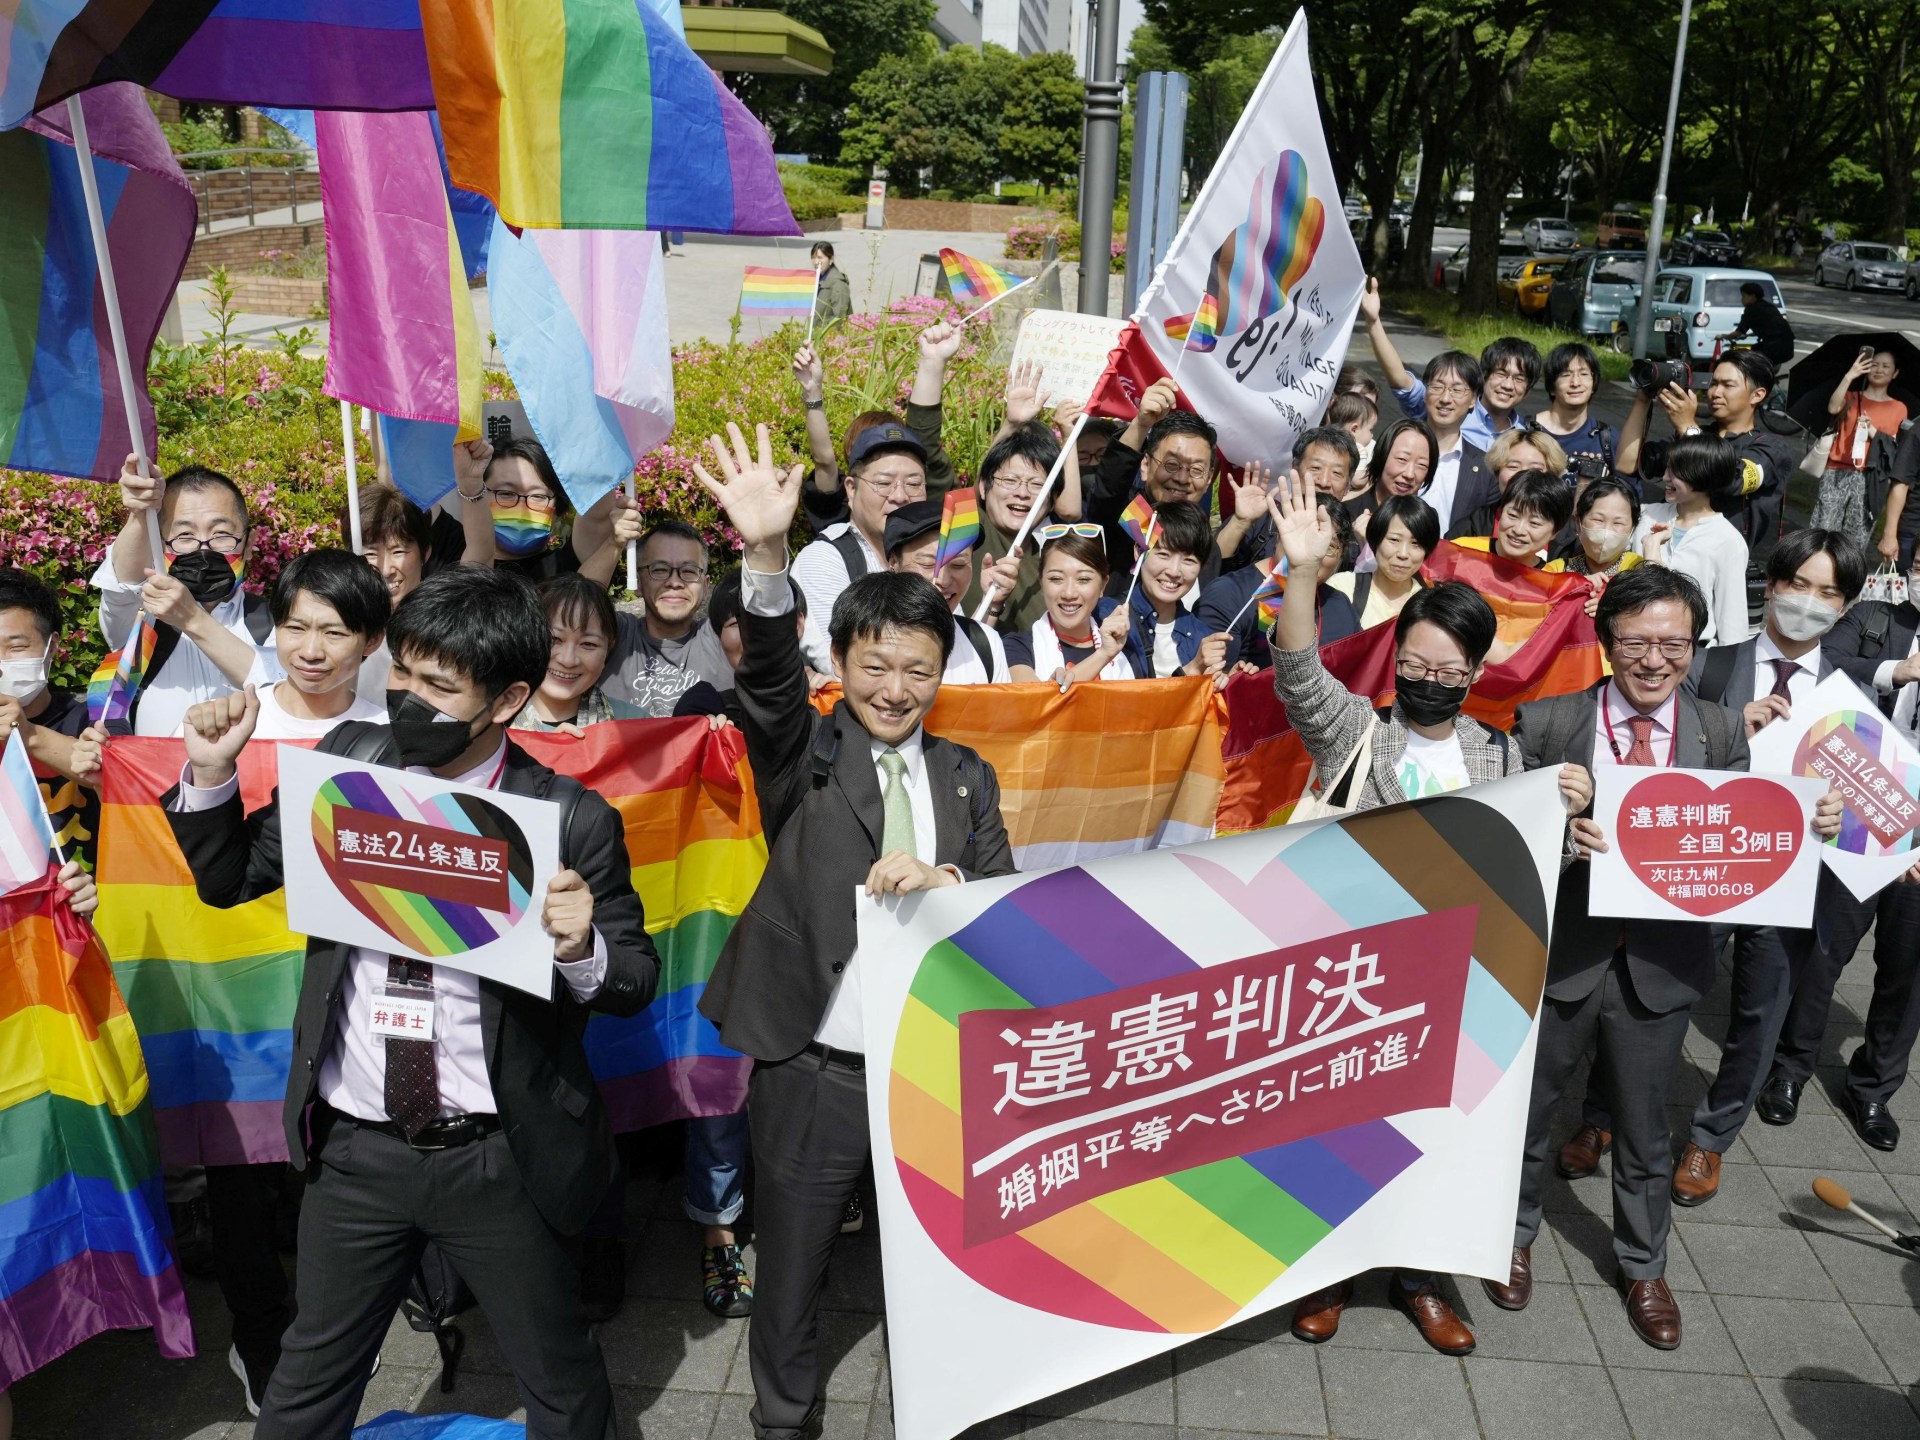 Japan court rules ban on same-sex marriage is ‘unconstitutional’ | LGBTQ News